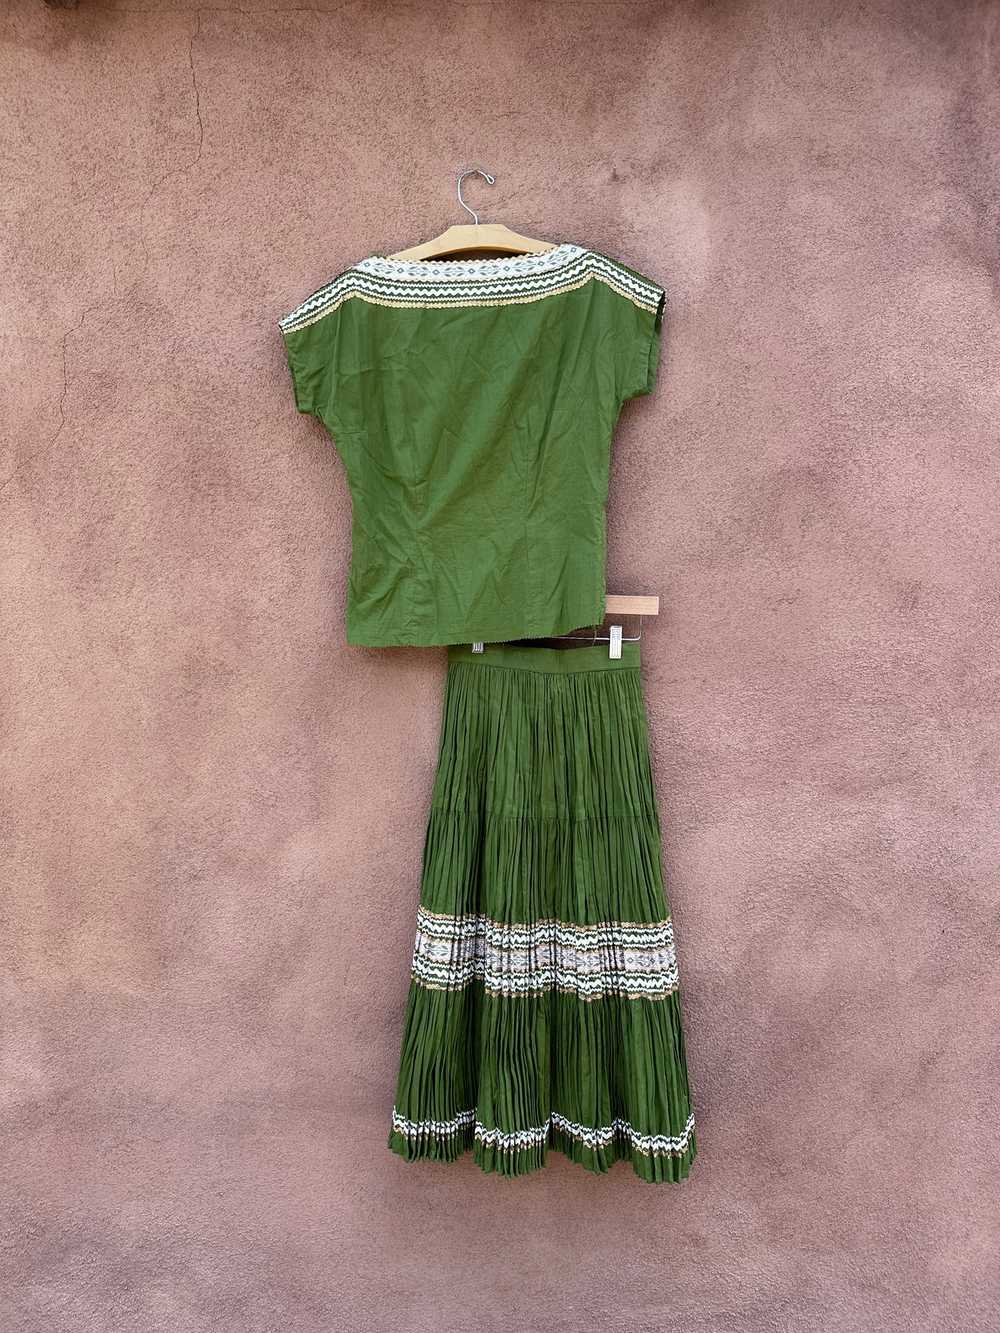 Fiesta/Patio Outfit with Interchangable Tops Gree… - image 2